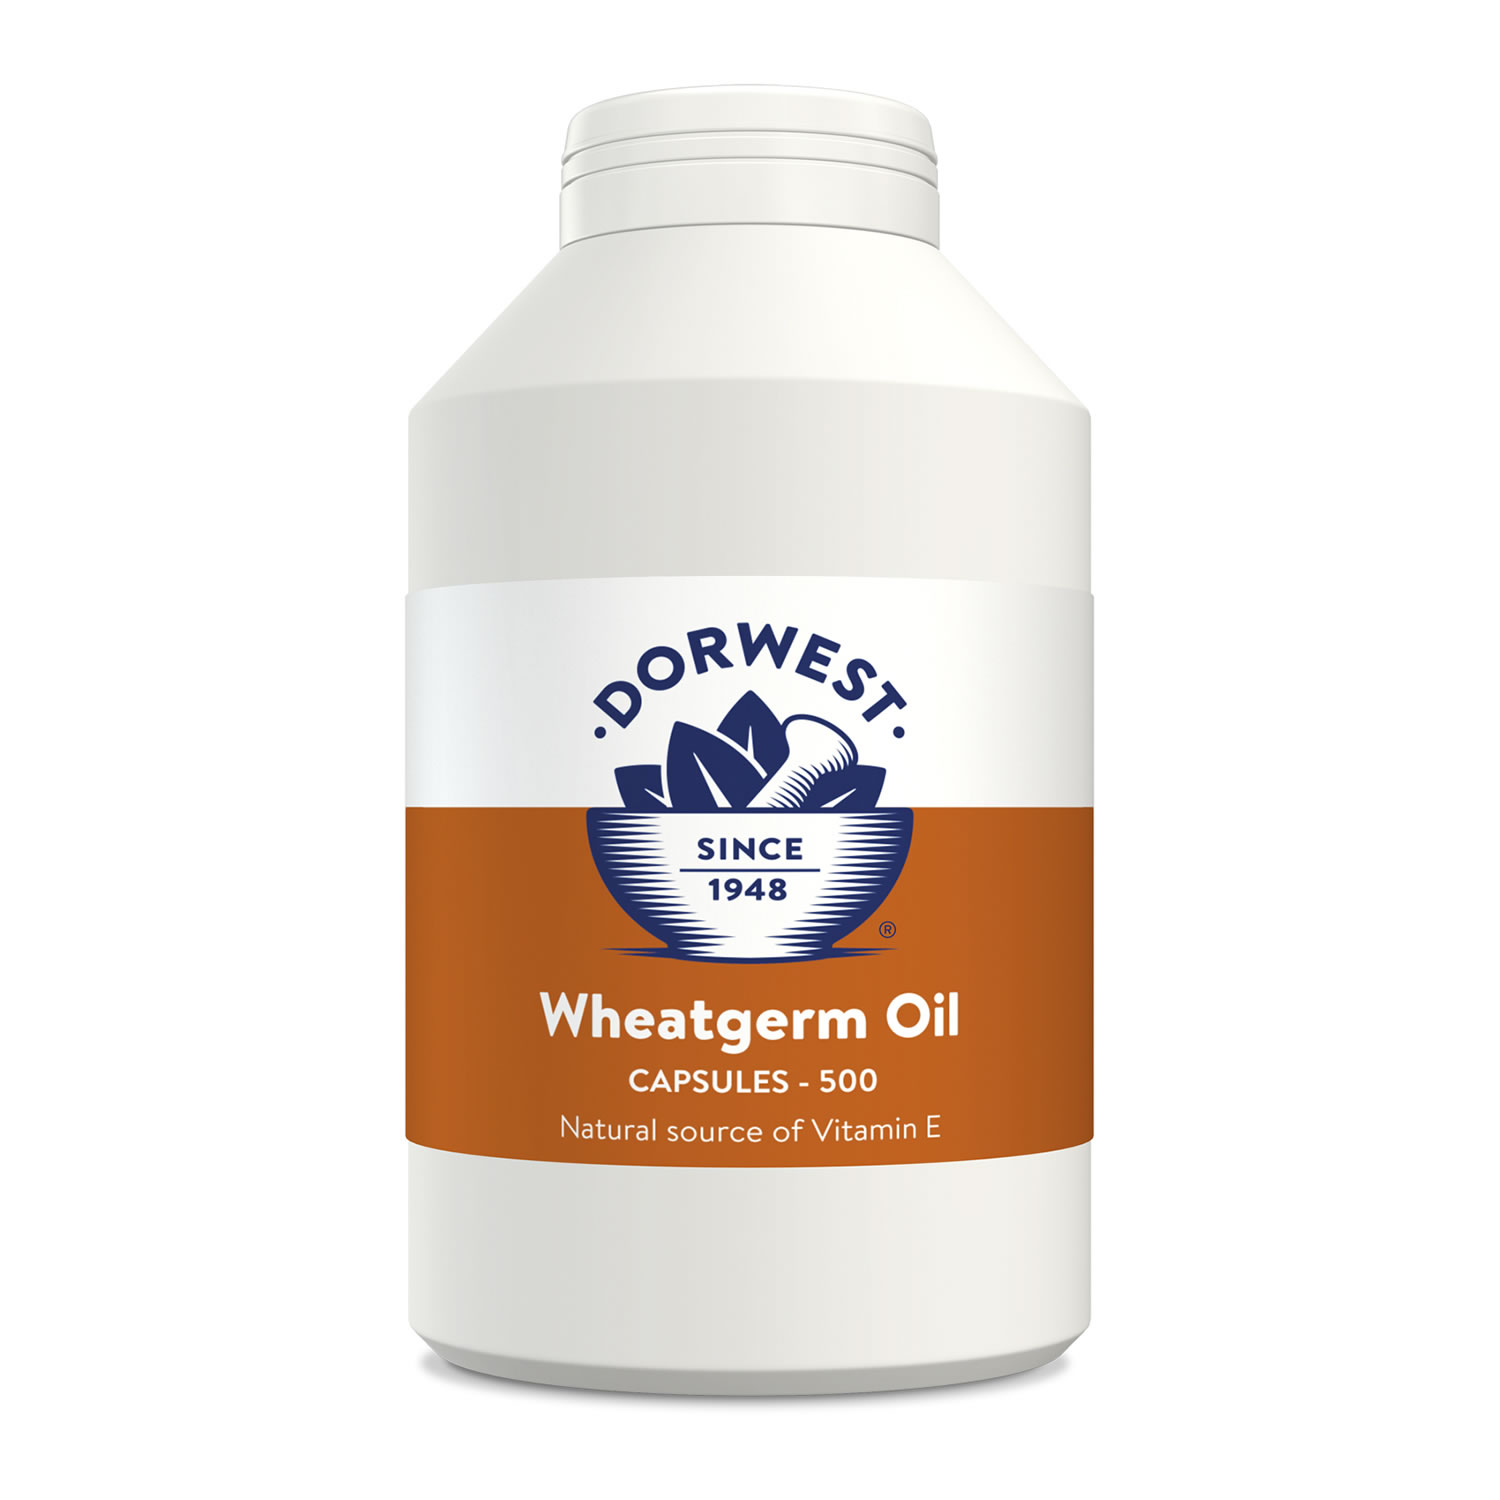 DORWEST HERBS WHEATGERM OIL FOR DOGS/CATS  500 CAPSULES